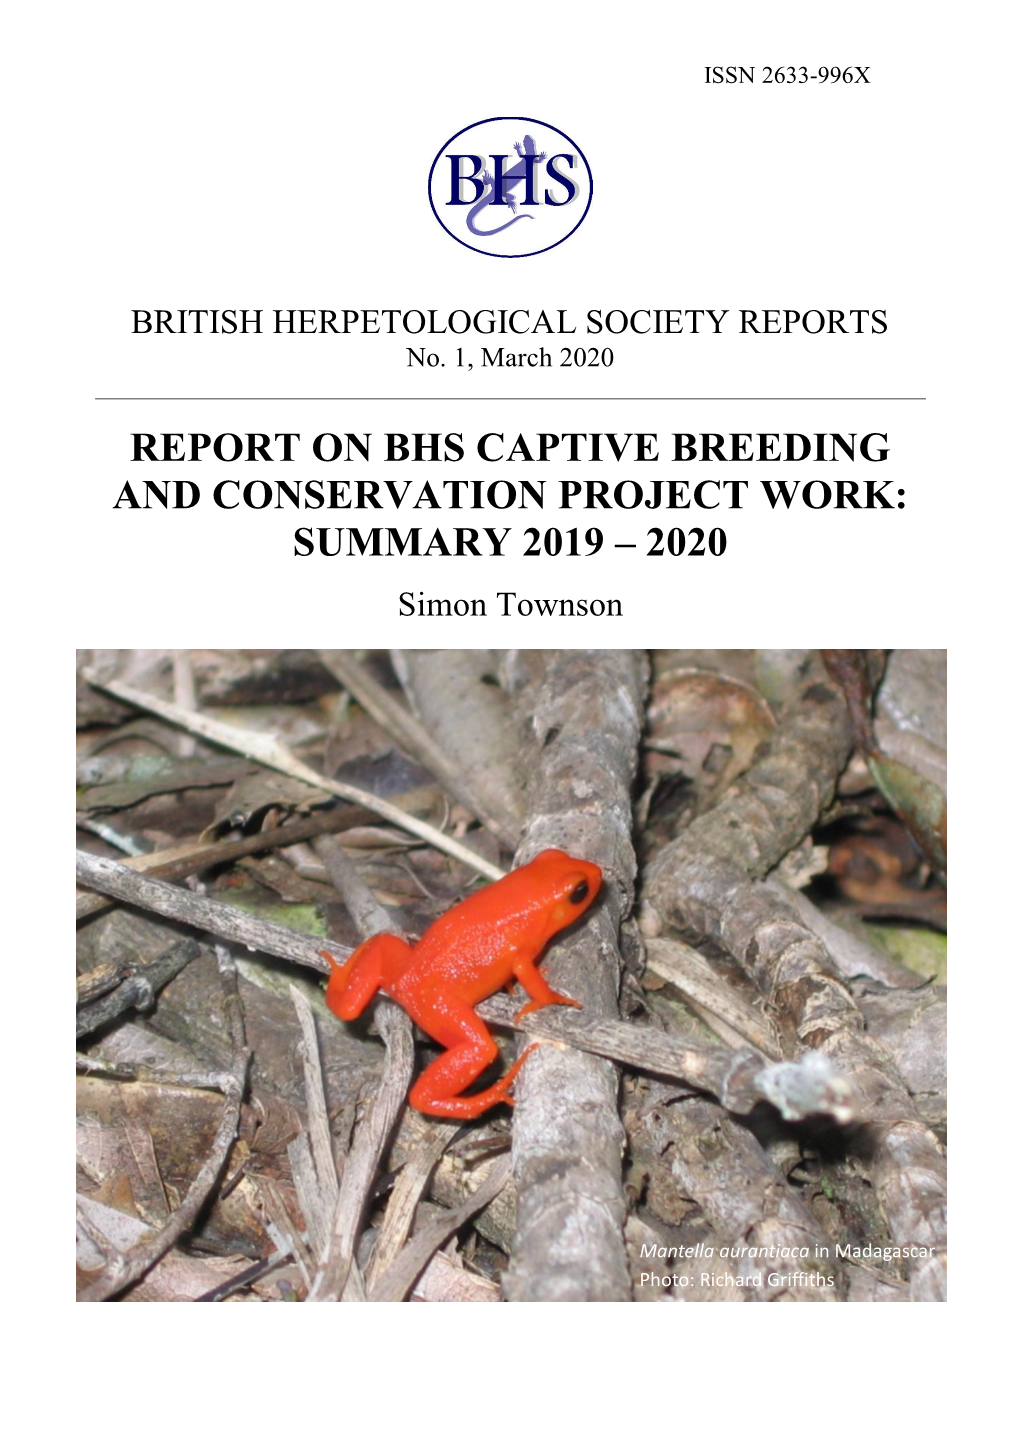 Report on Bhs Captive Breeding and Conservation Project Work: Summary 2019 – 2020